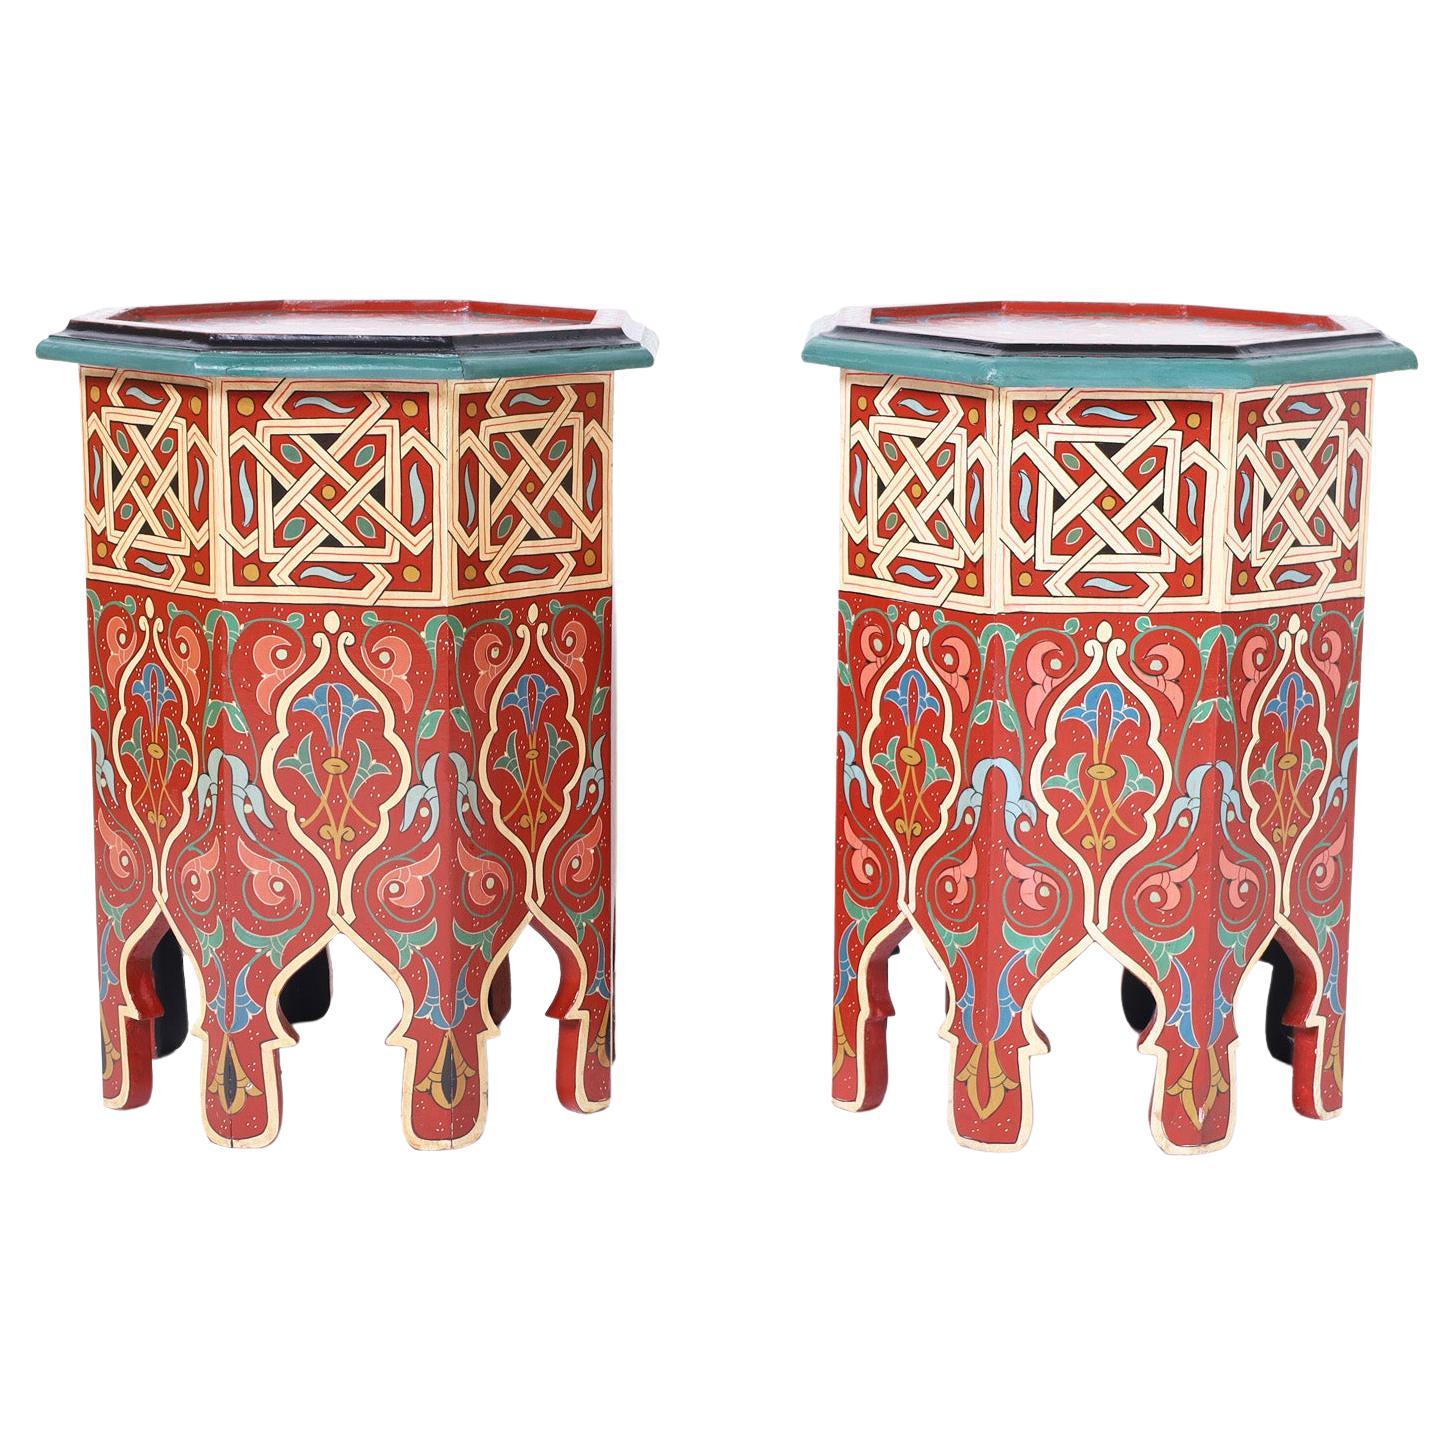 Pair of Vintage Painted Moroccan Stands